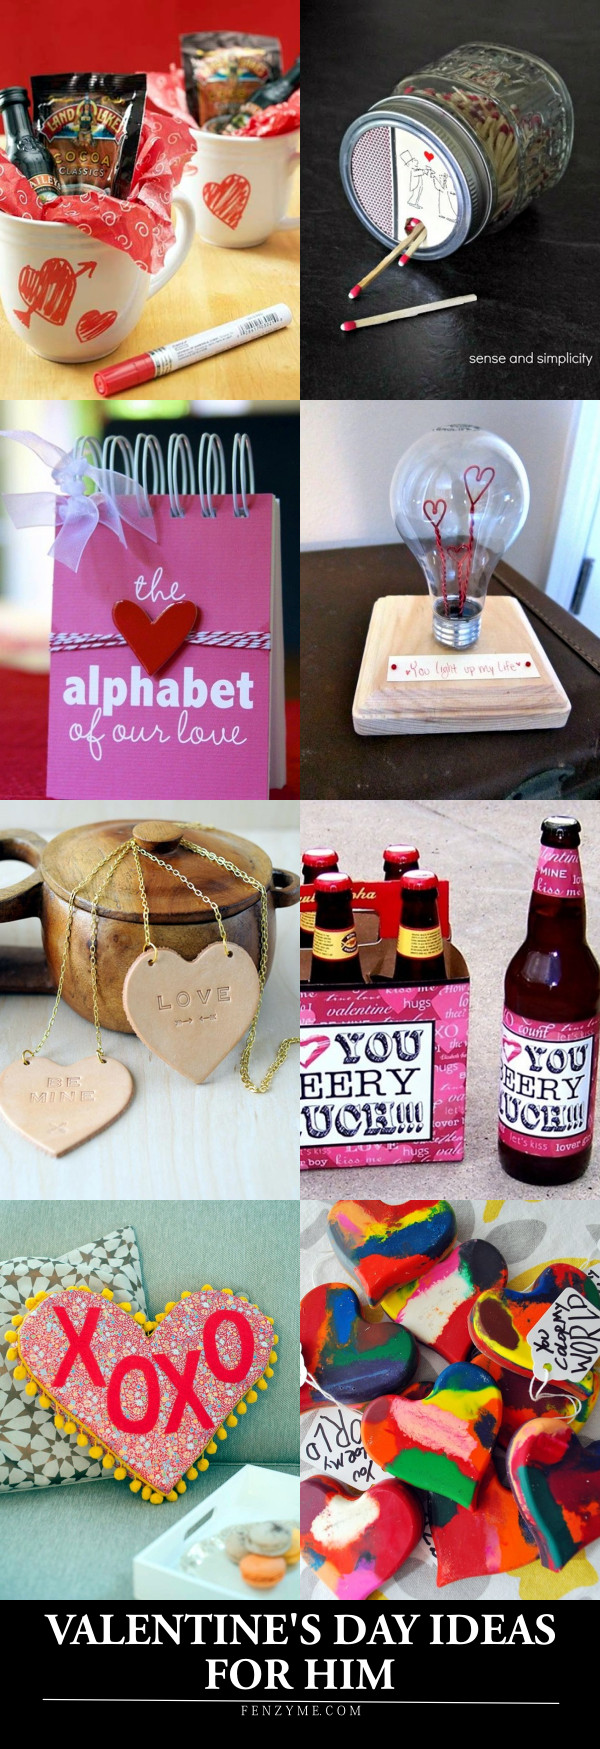 Valentines Day Ideas For Him
 101 Homemade Valentines Day Ideas for Him that re really CUTE